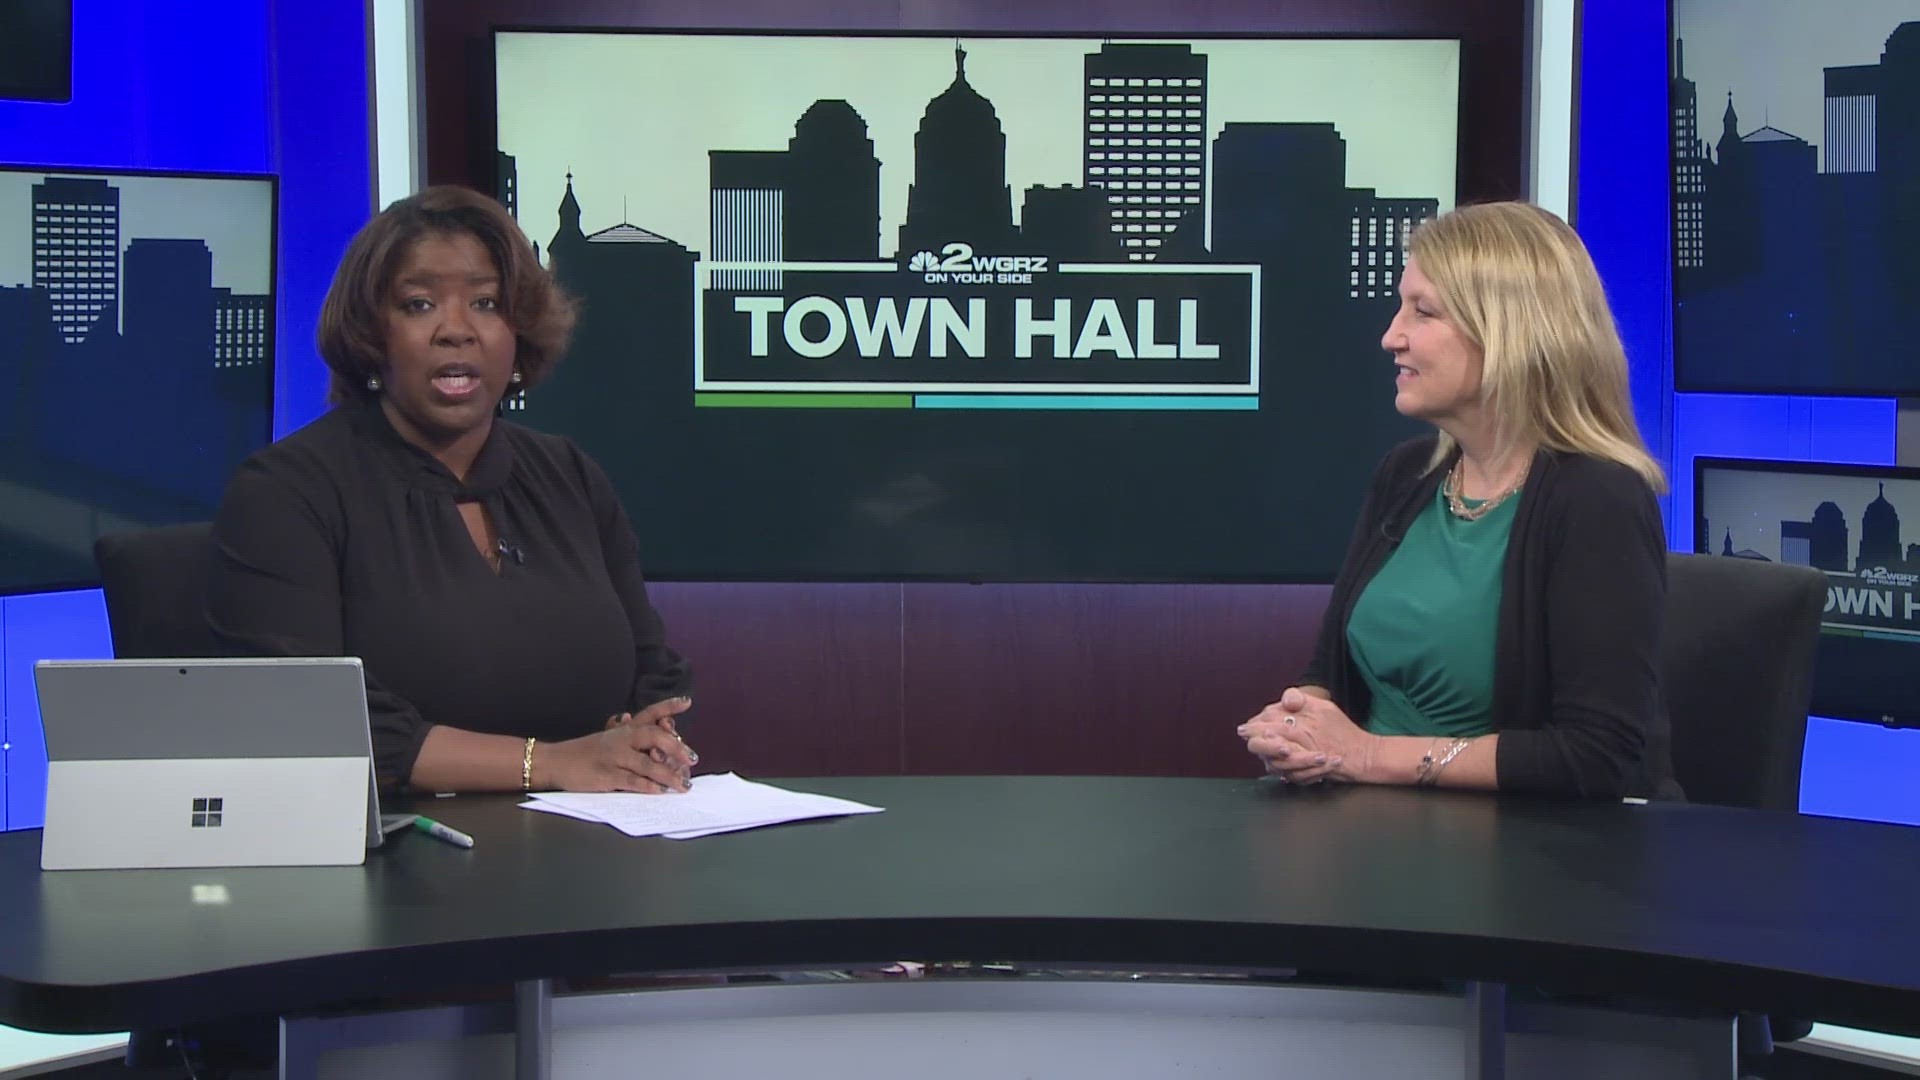 WNYers are getting ready for spring break, AAA provides some travel tips and Elizabeth Carey Joins the town hall to discuss safety travel tips.